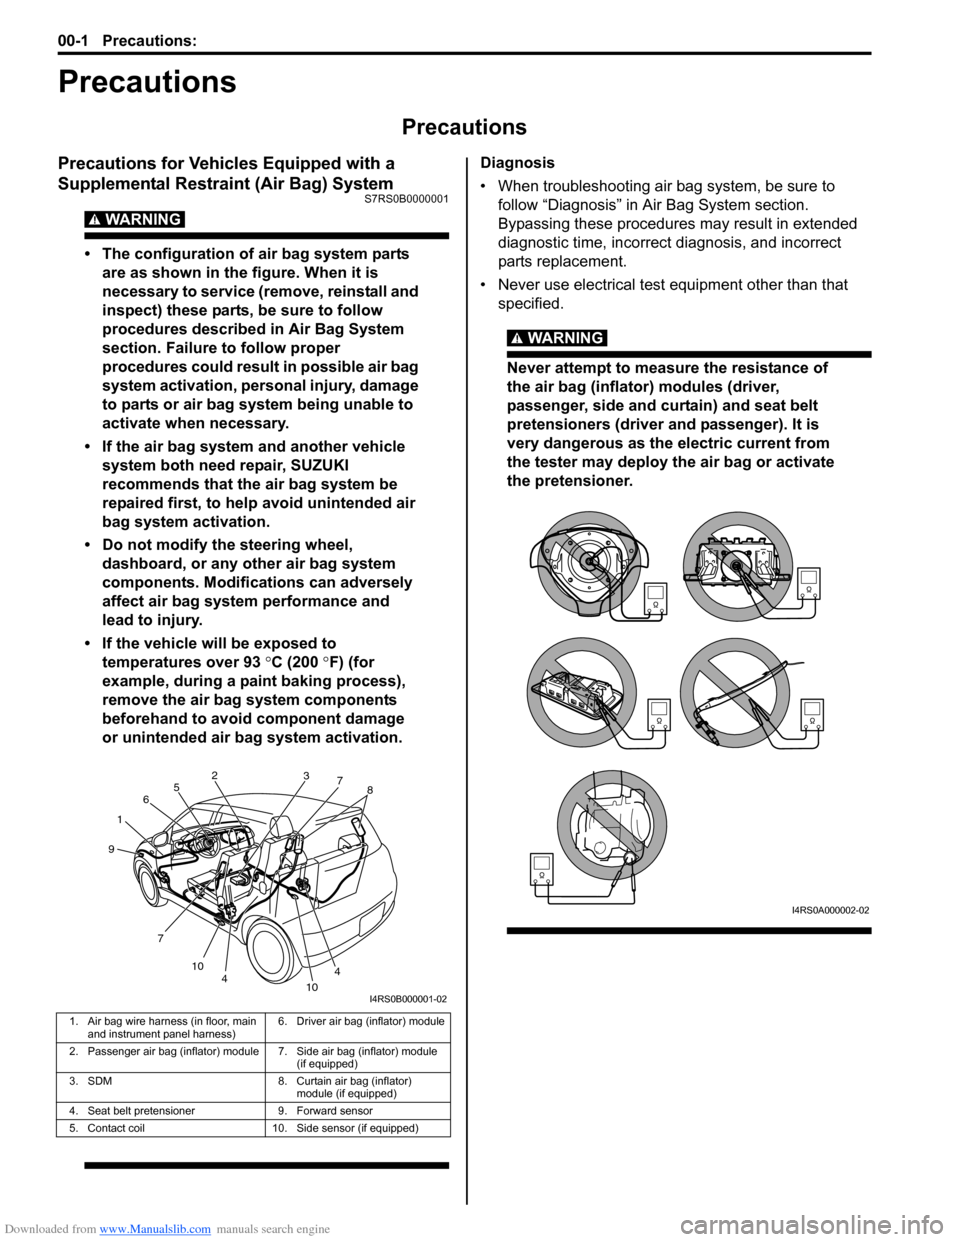 SUZUKI SWIFT 2006 2.G Service Workshop Manual Downloaded from www.Manualslib.com manuals search engine 00-1 Precautions: 
Precautions
Precautions
Precautions
Precautions for Vehicles Equipped with a 
Supplemental Restraint (Air Bag) System
S7RS0B